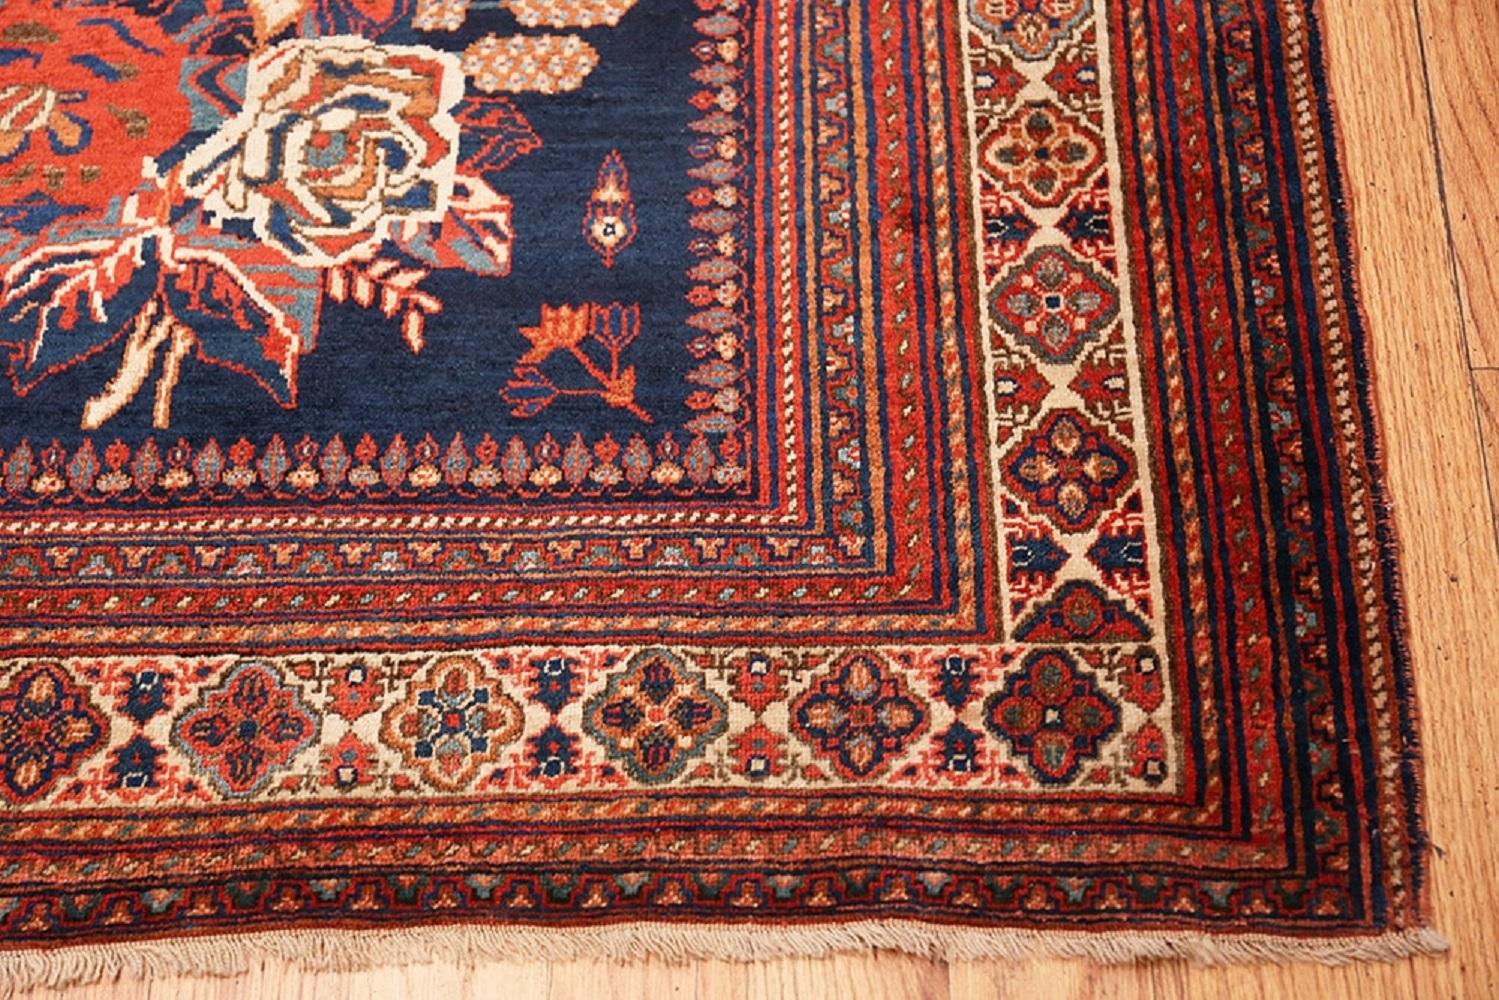 Antique Persian Afshar Rug, Country of Origin: Persia, Circa Date: 1880. Size: 5 ft 2 in x 5 ft 8 in (1.57 m x 1.73 m).